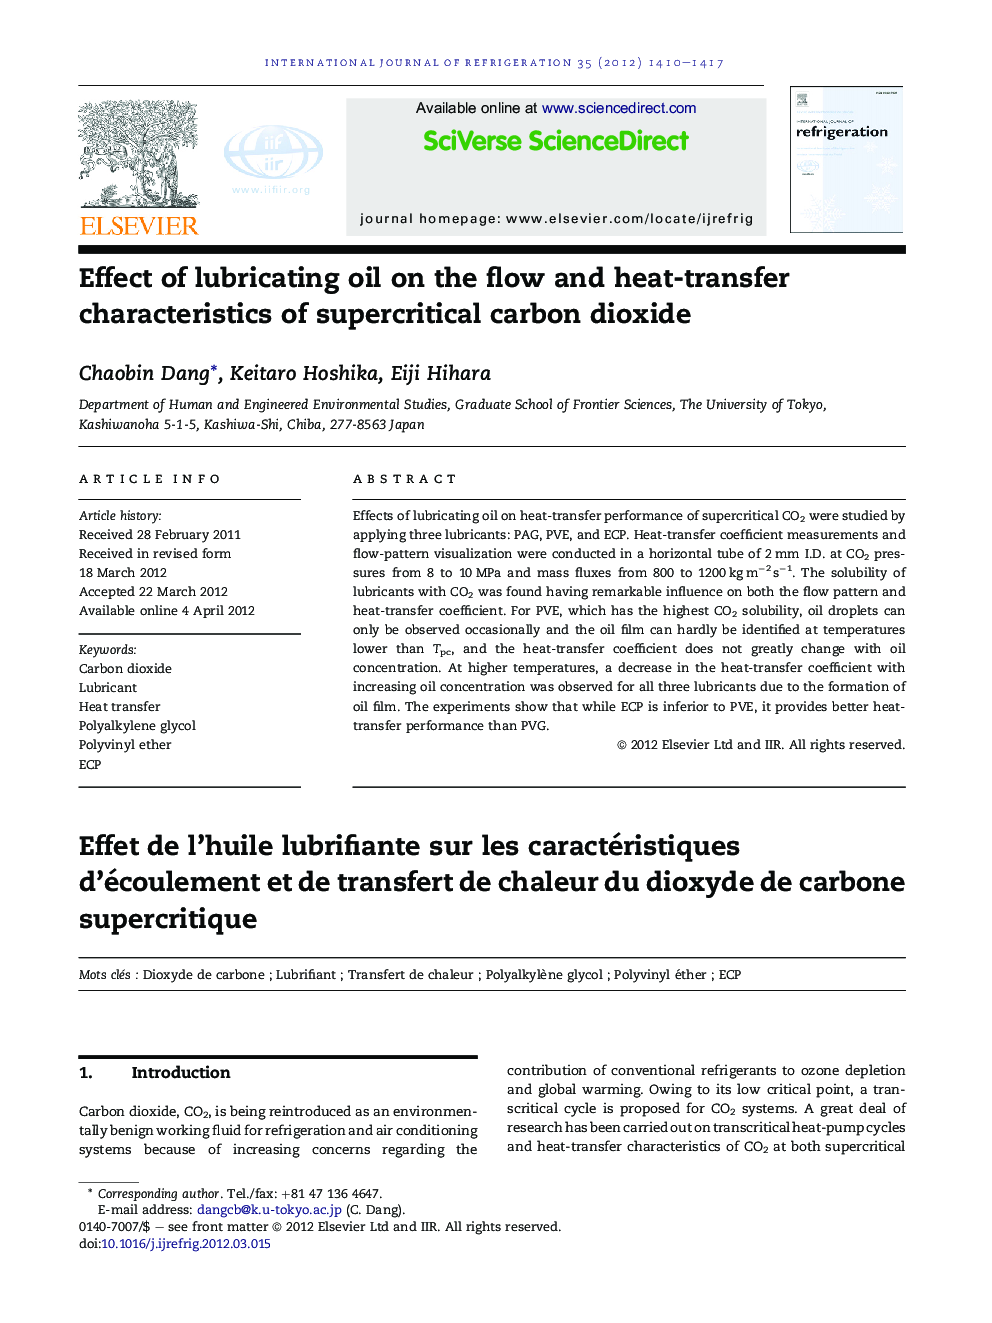 Effect of lubricating oil on the flow and heat-transfer characteristics of supercritical carbon dioxide